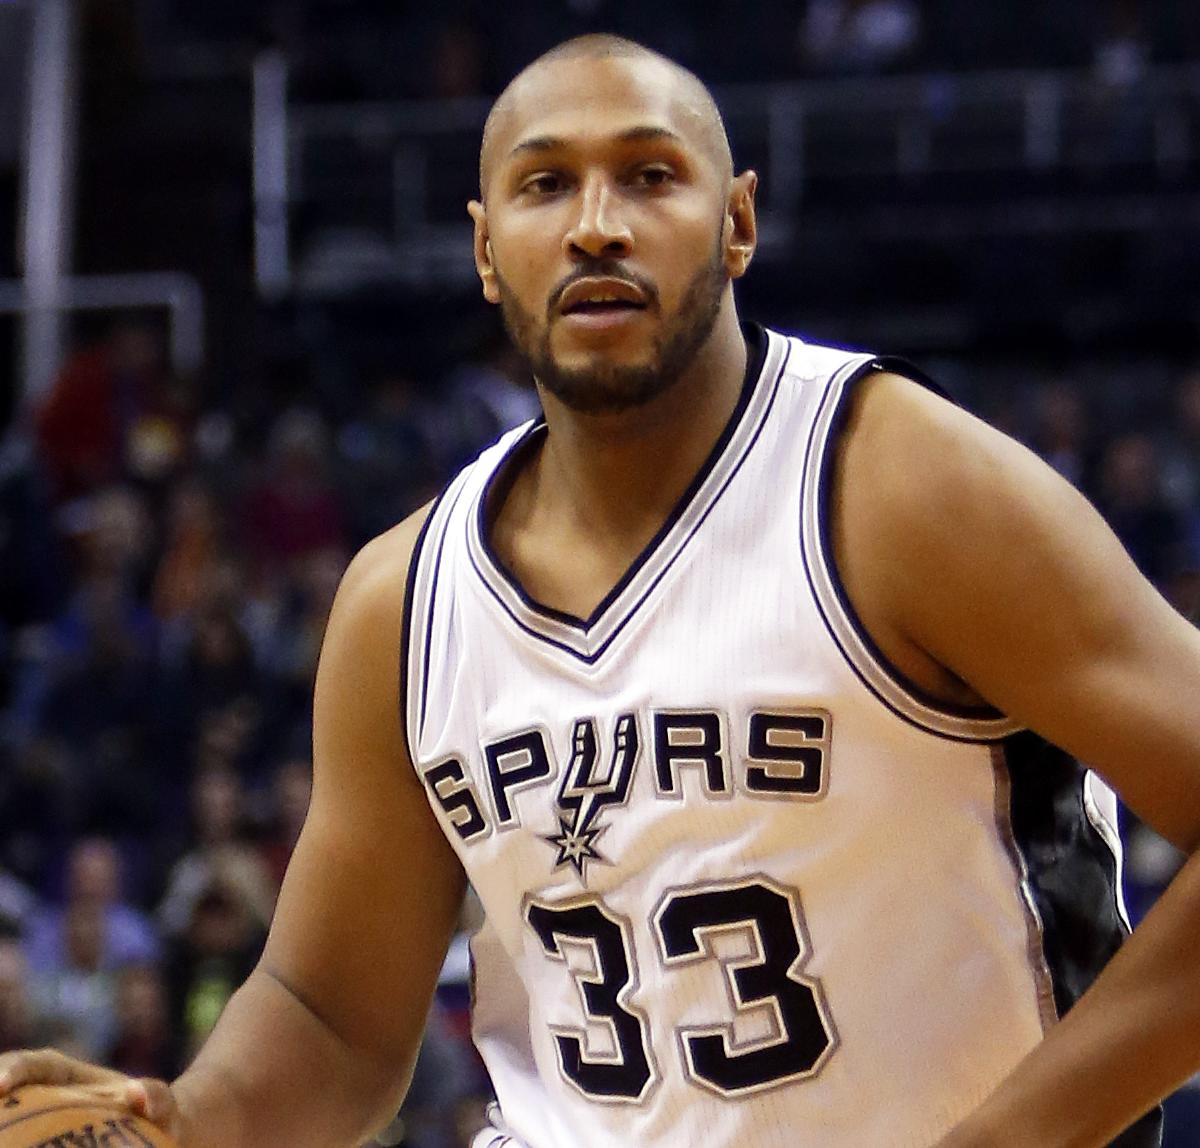 Boris Diaw Retires At Age 36 Played With Spurs Suns Hornets Hawks Jazz Bleacher Report Latest News Videos And Highlights